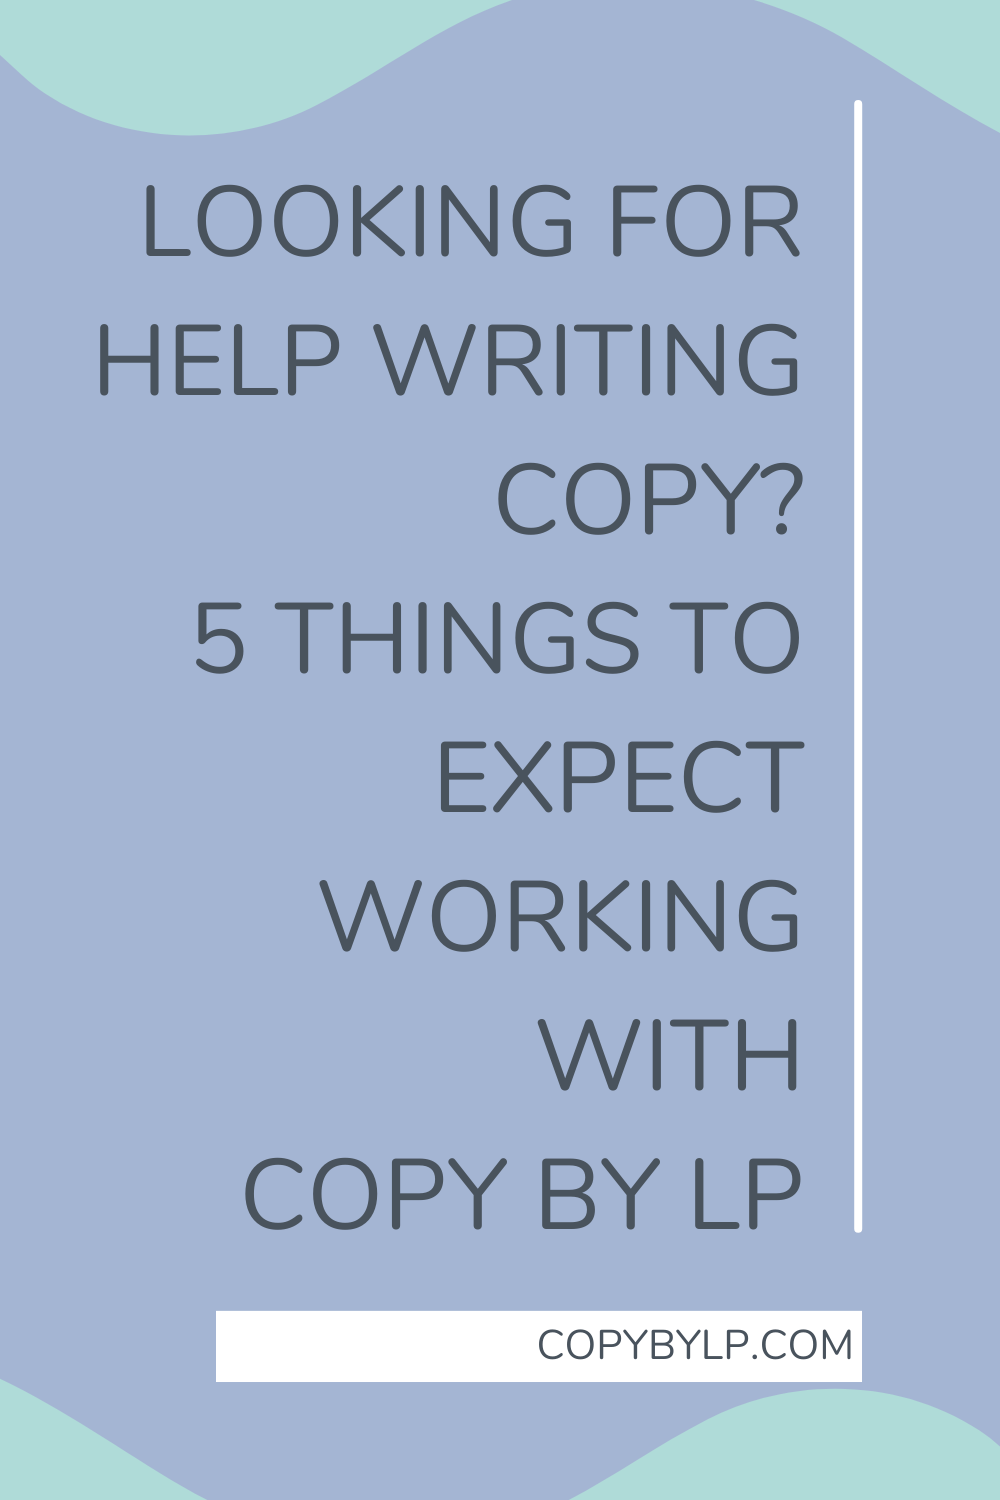 Looking for help writing copy? 5 things to expect working with copy by LP blog title graphic